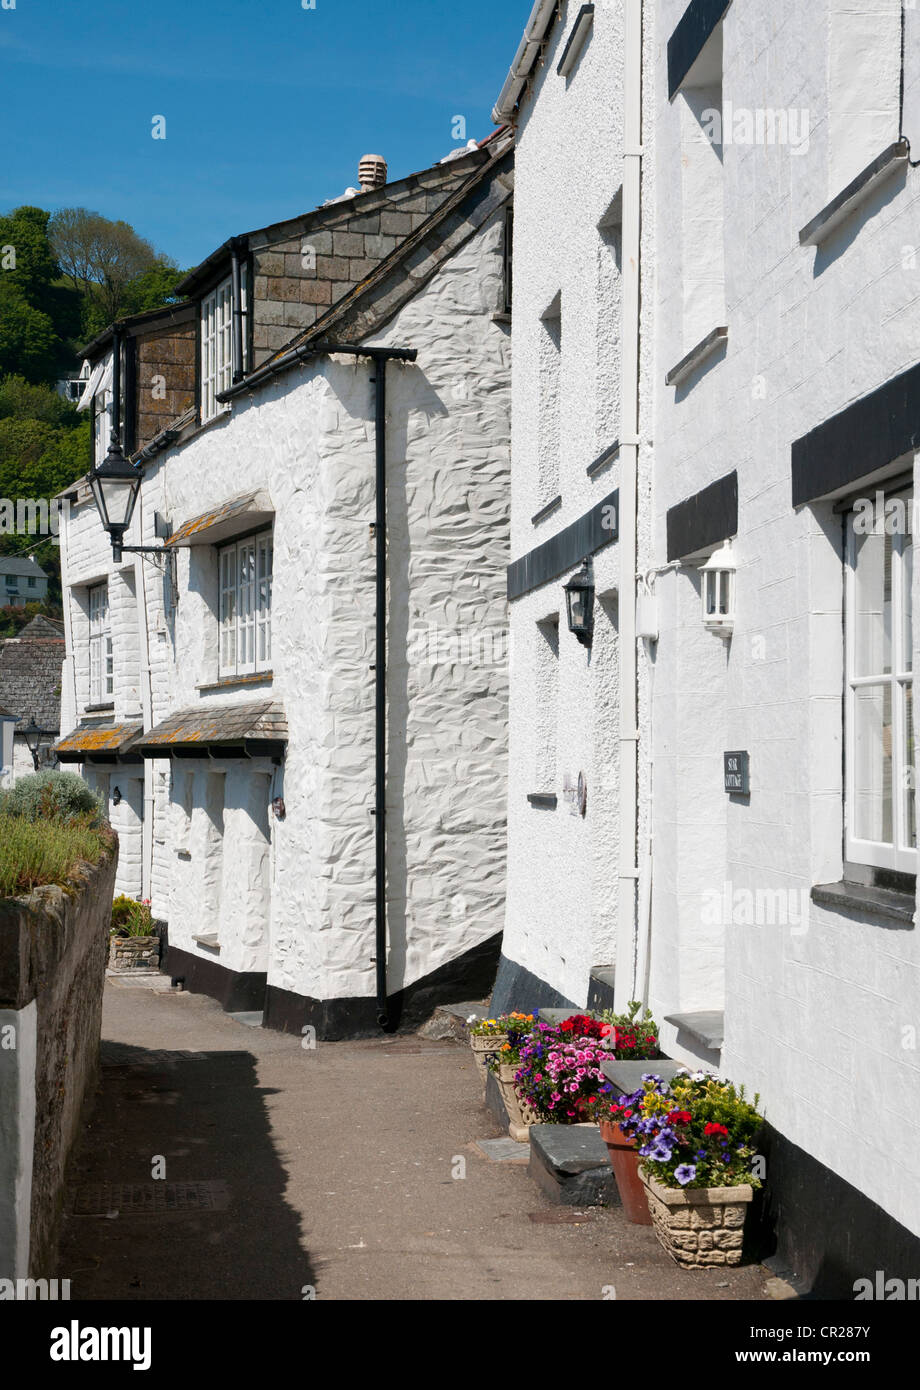 Whitewashed cottages in narrow street of fishing village of Polperro, Cornwall, UK Stock Photo